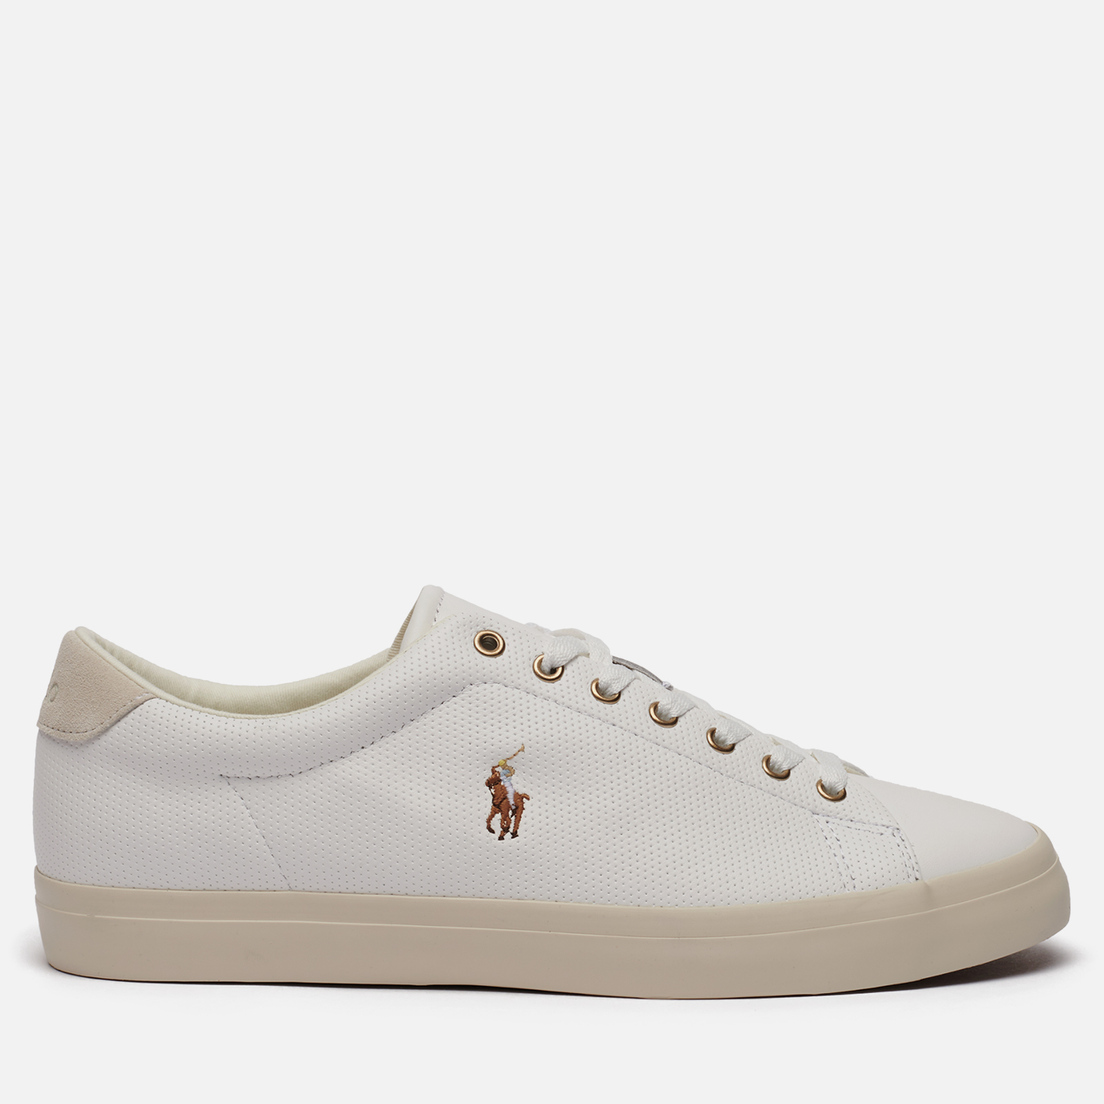 Polo Ralph Lauren Мужские кроссовки Longwood Perforated Nappa Smooth Leather